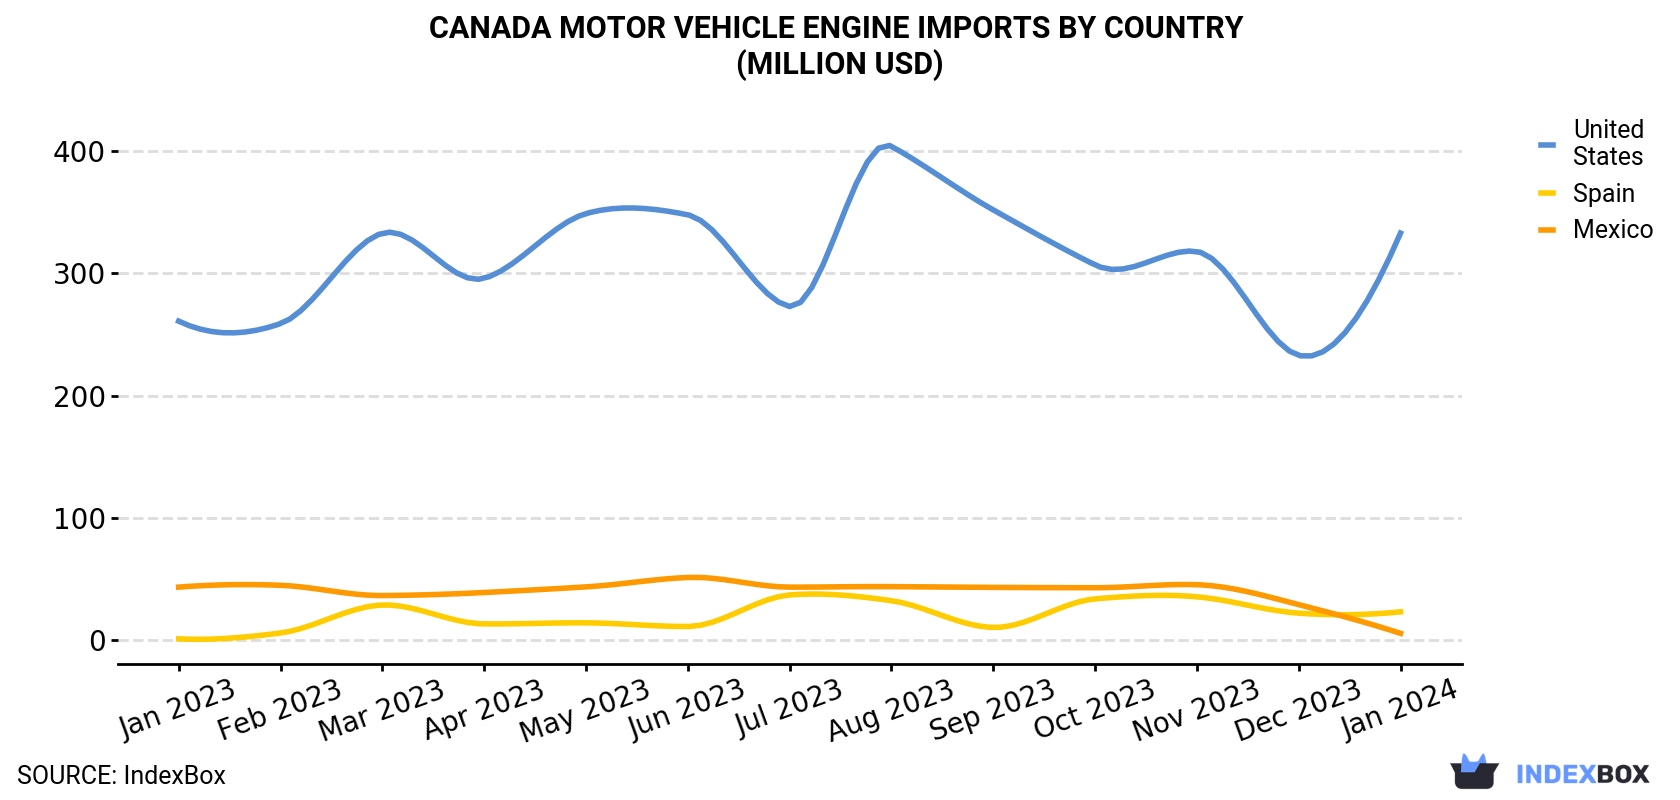 Canada Motor Vehicle Engine Imports By Country (Million USD)